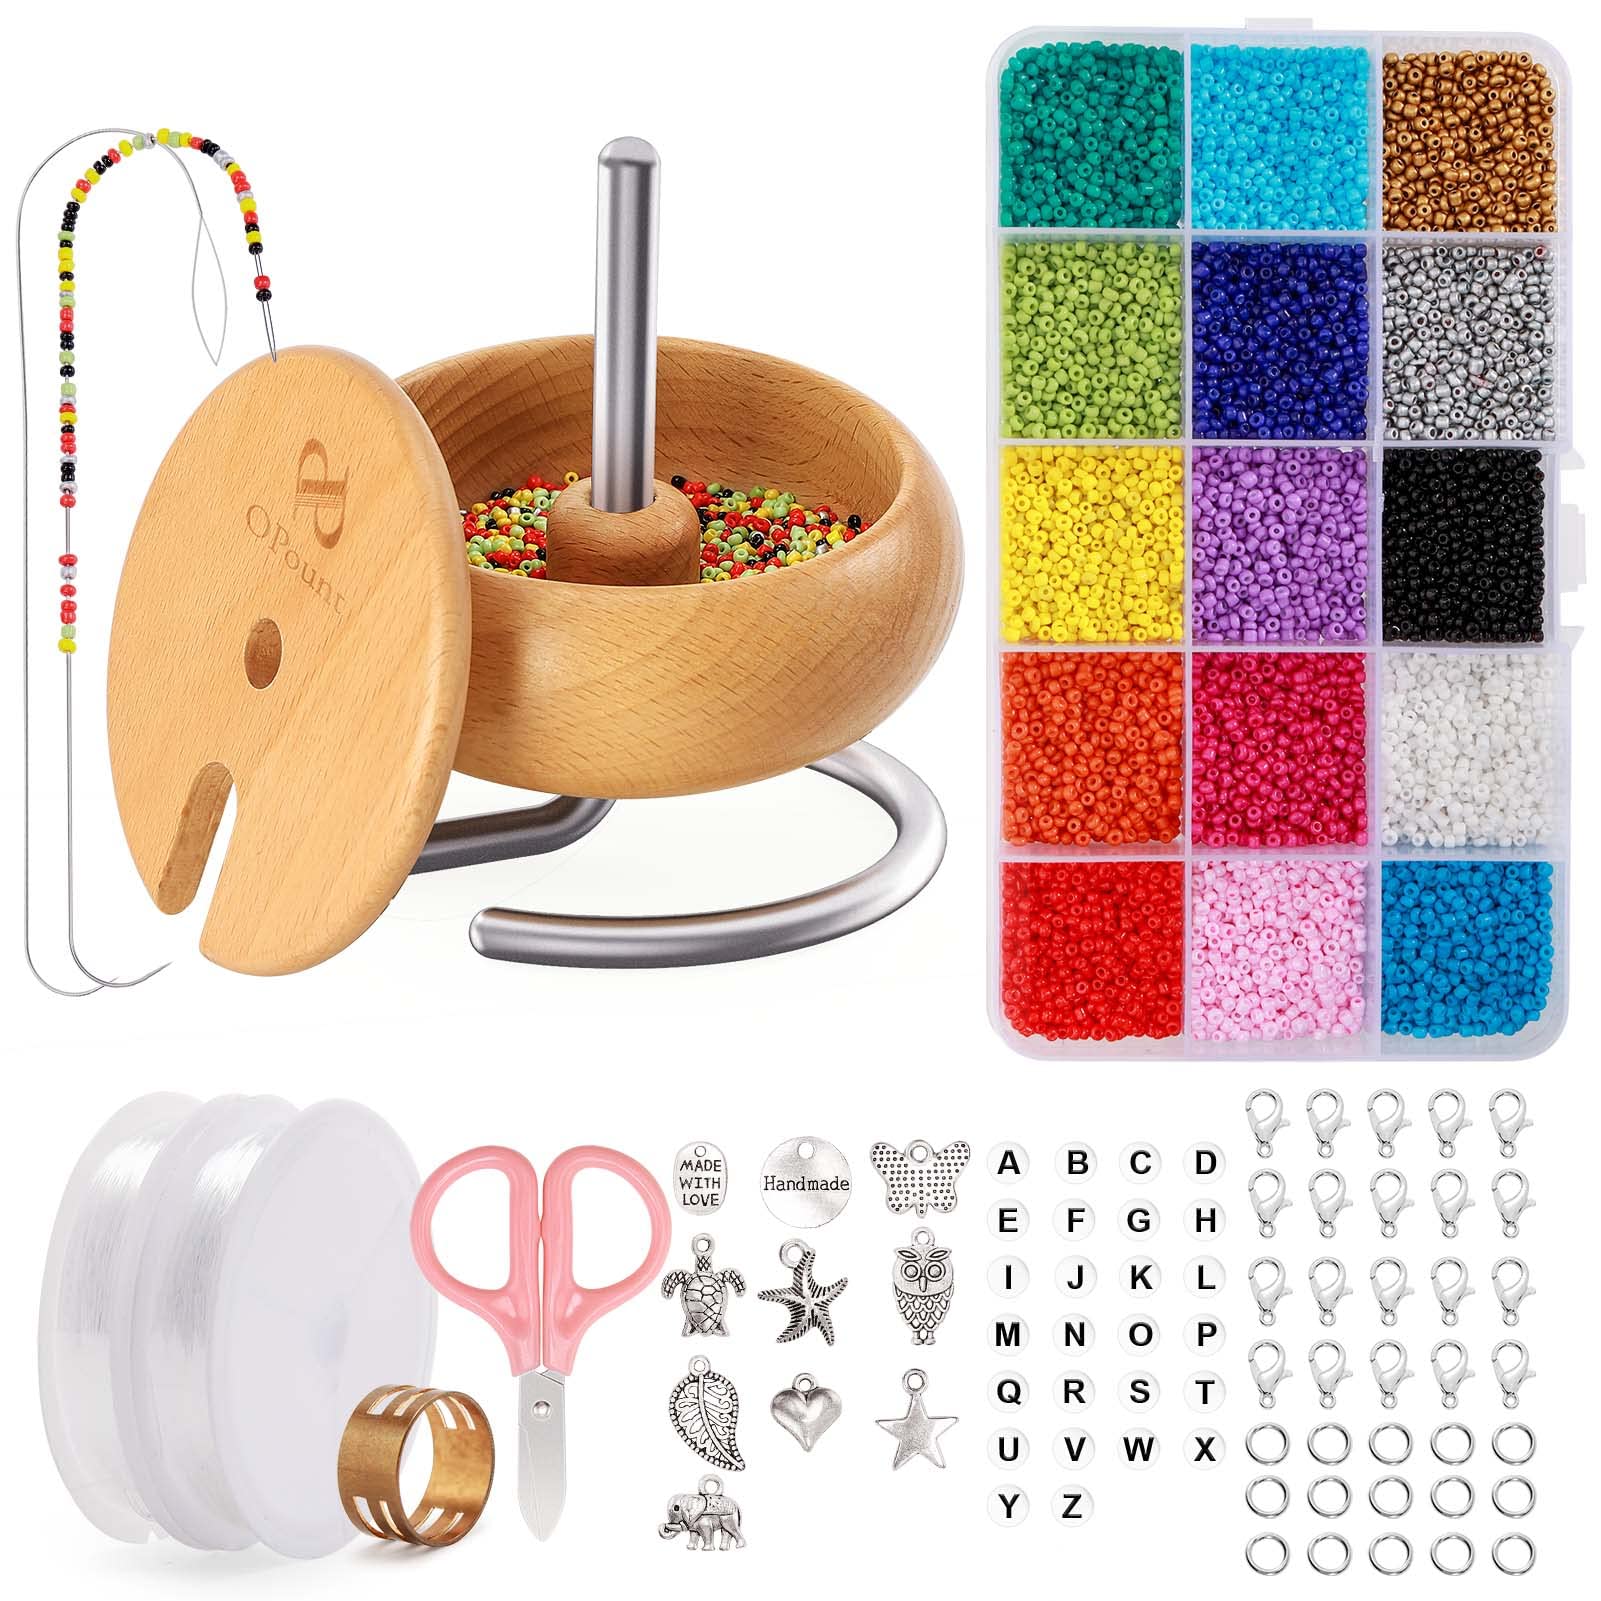 PP OPOUNT Bead Spinner Bowl with 2 PCS Large Eye Beading Needles and 15000  PCS Seed Beads, Spin Beading Bowl for Jewelry Making, Waist Bead Spinner  for DIY Beading Craft(Patent Protection) 11